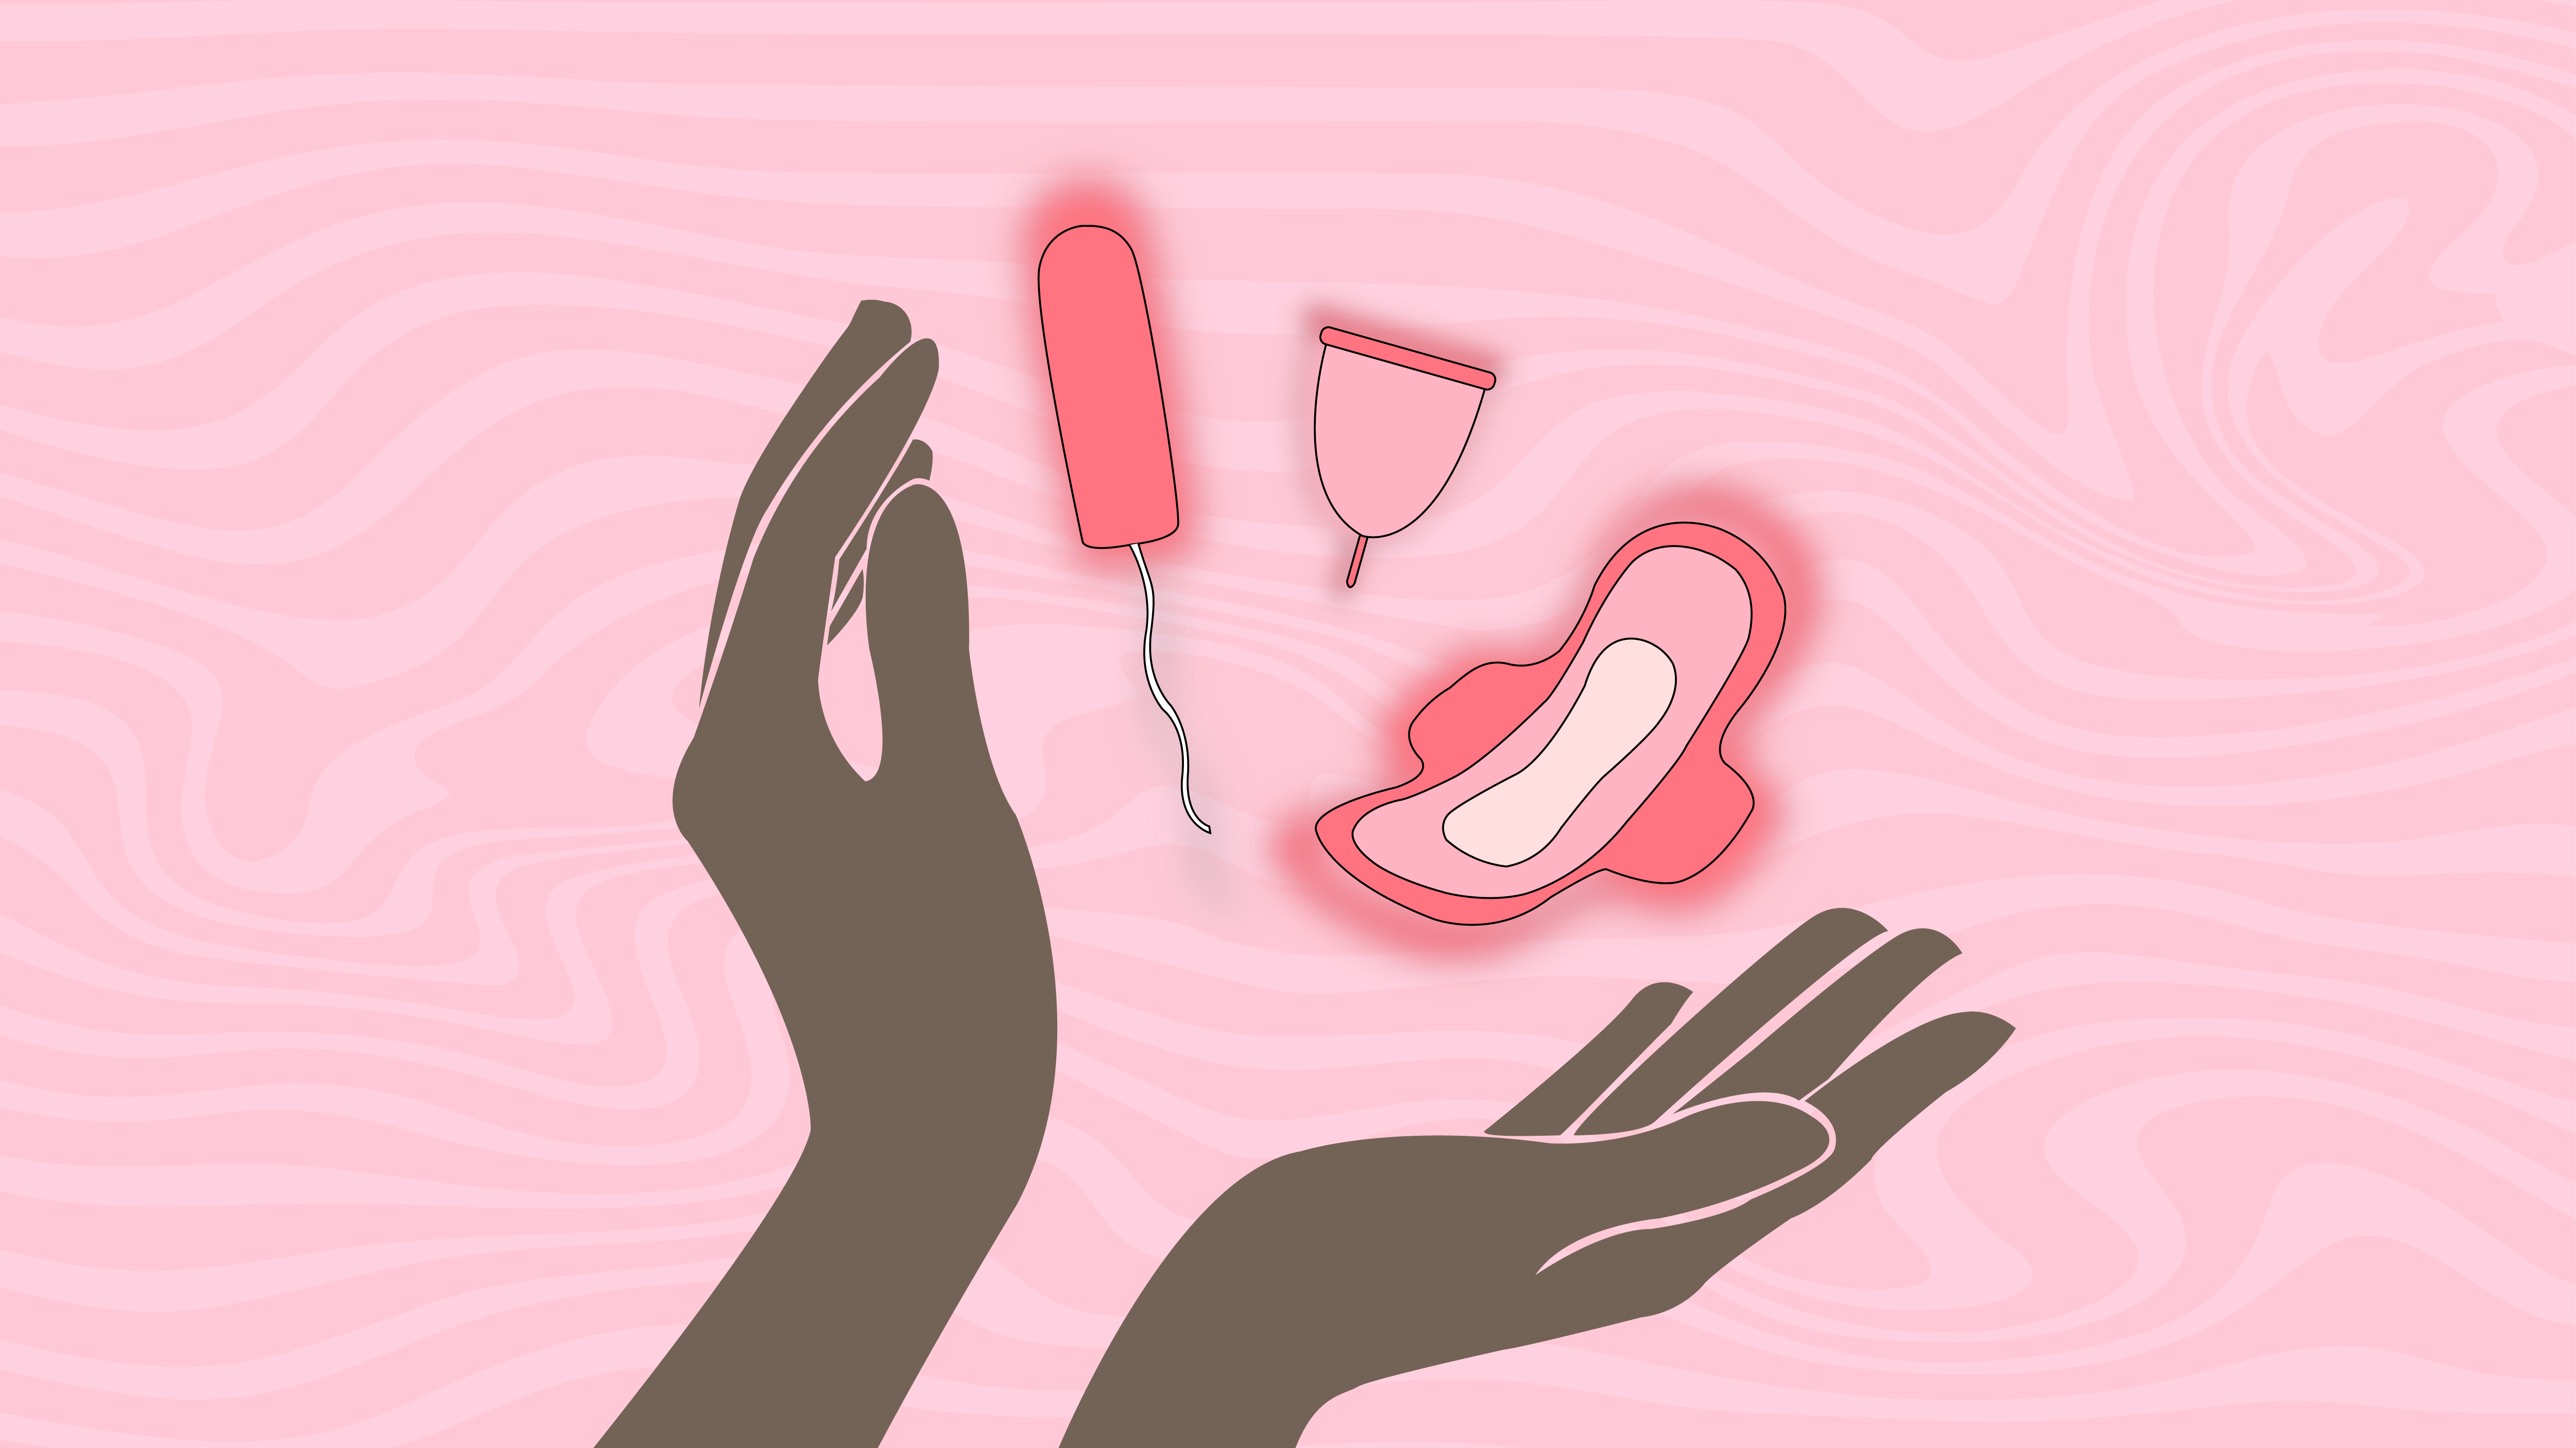 An illustration of darker-toned hands beneath a tampon, a menstrual cup, and a sanitary pad on a light pink background with wavy lines.